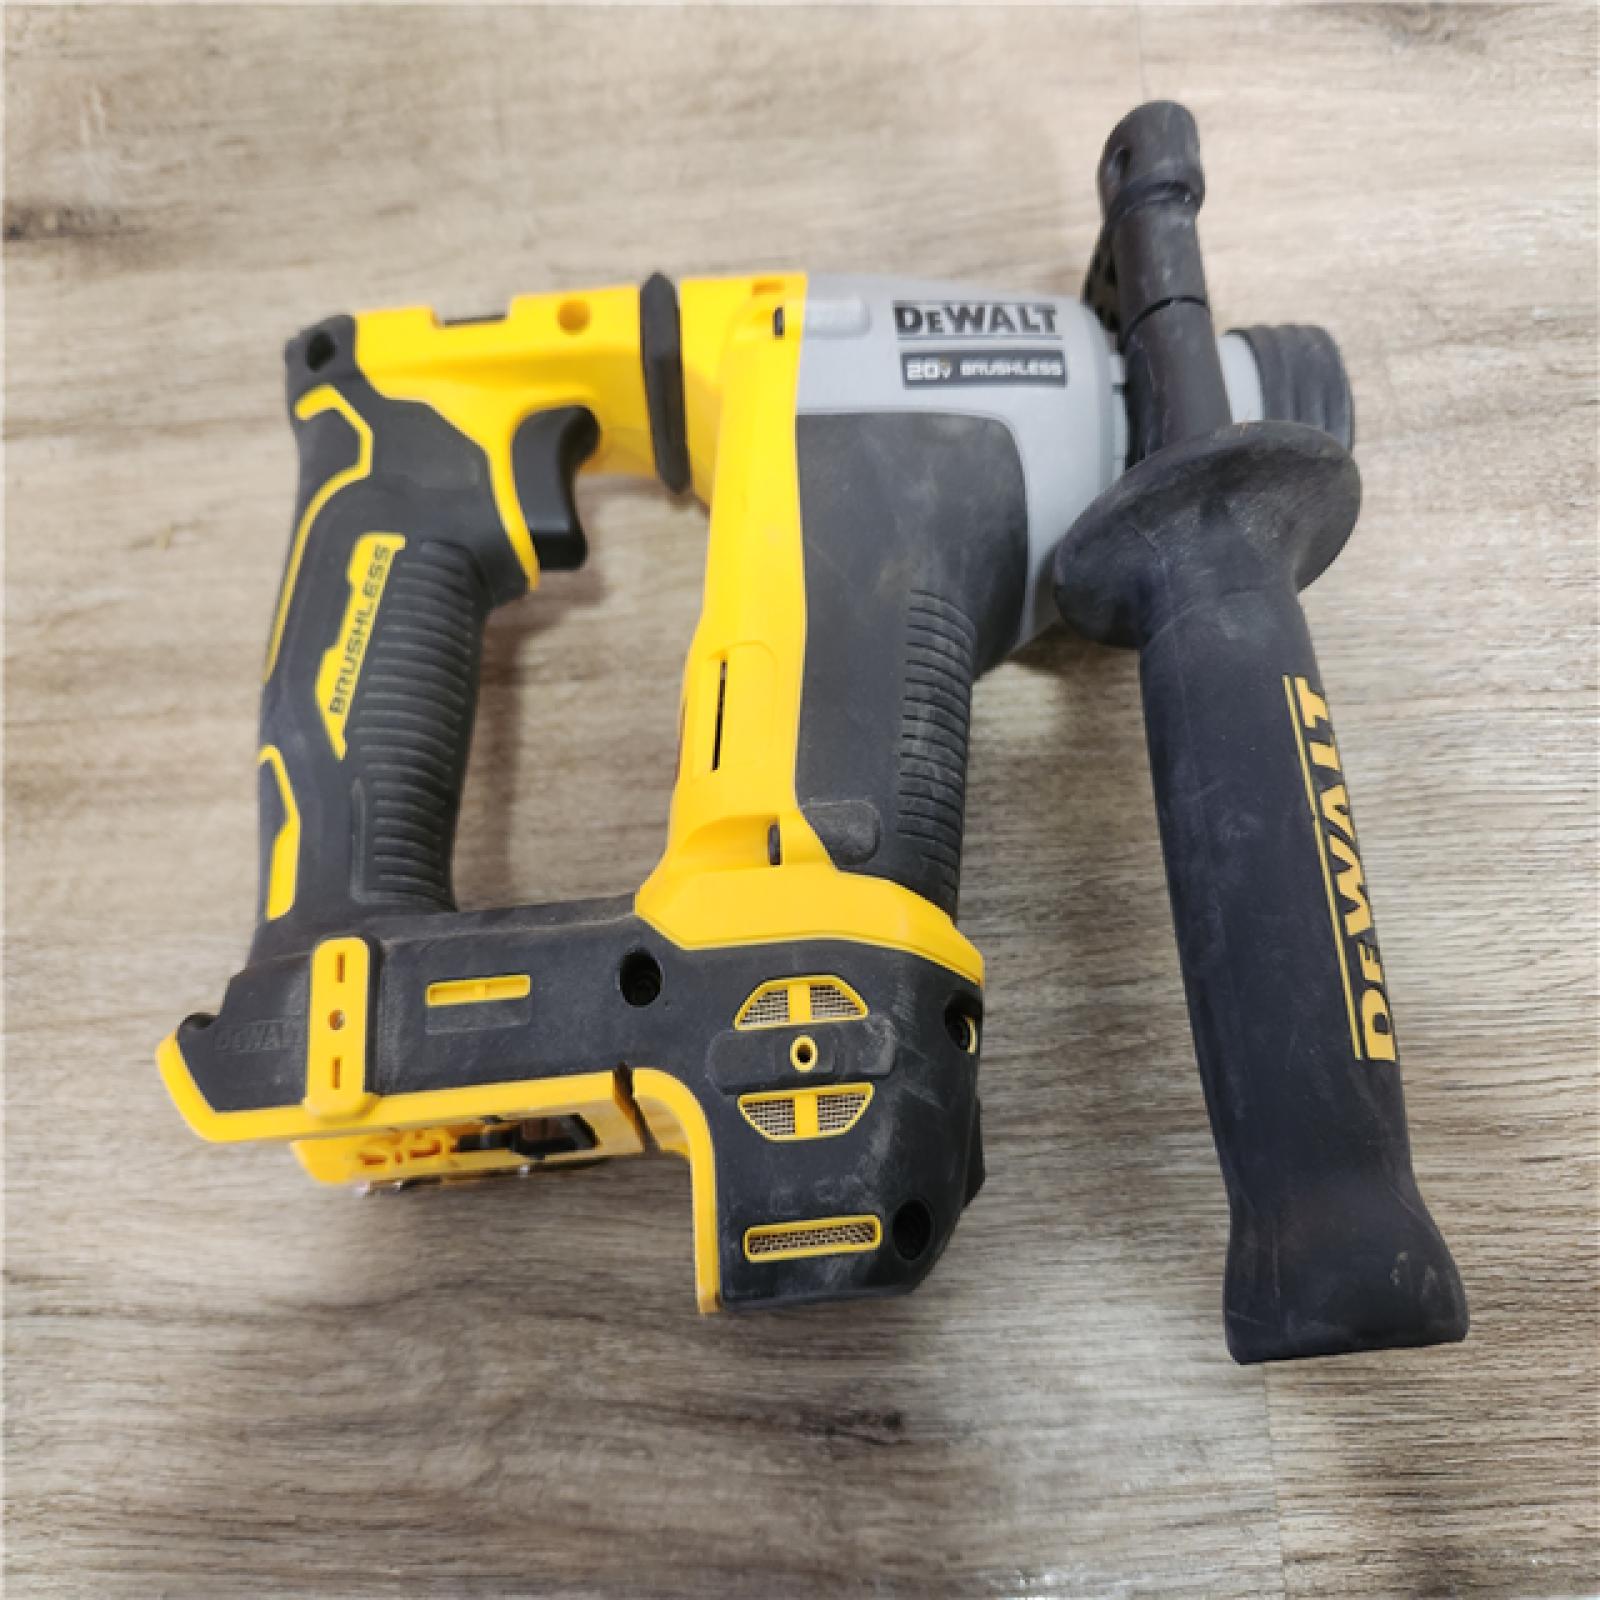 Phoenix DEWALT ATOMIC 20V MAX Cordless Brushless Ultra-Compact 5/8 in. SDS Plus Hammer Drill (Tool Only)